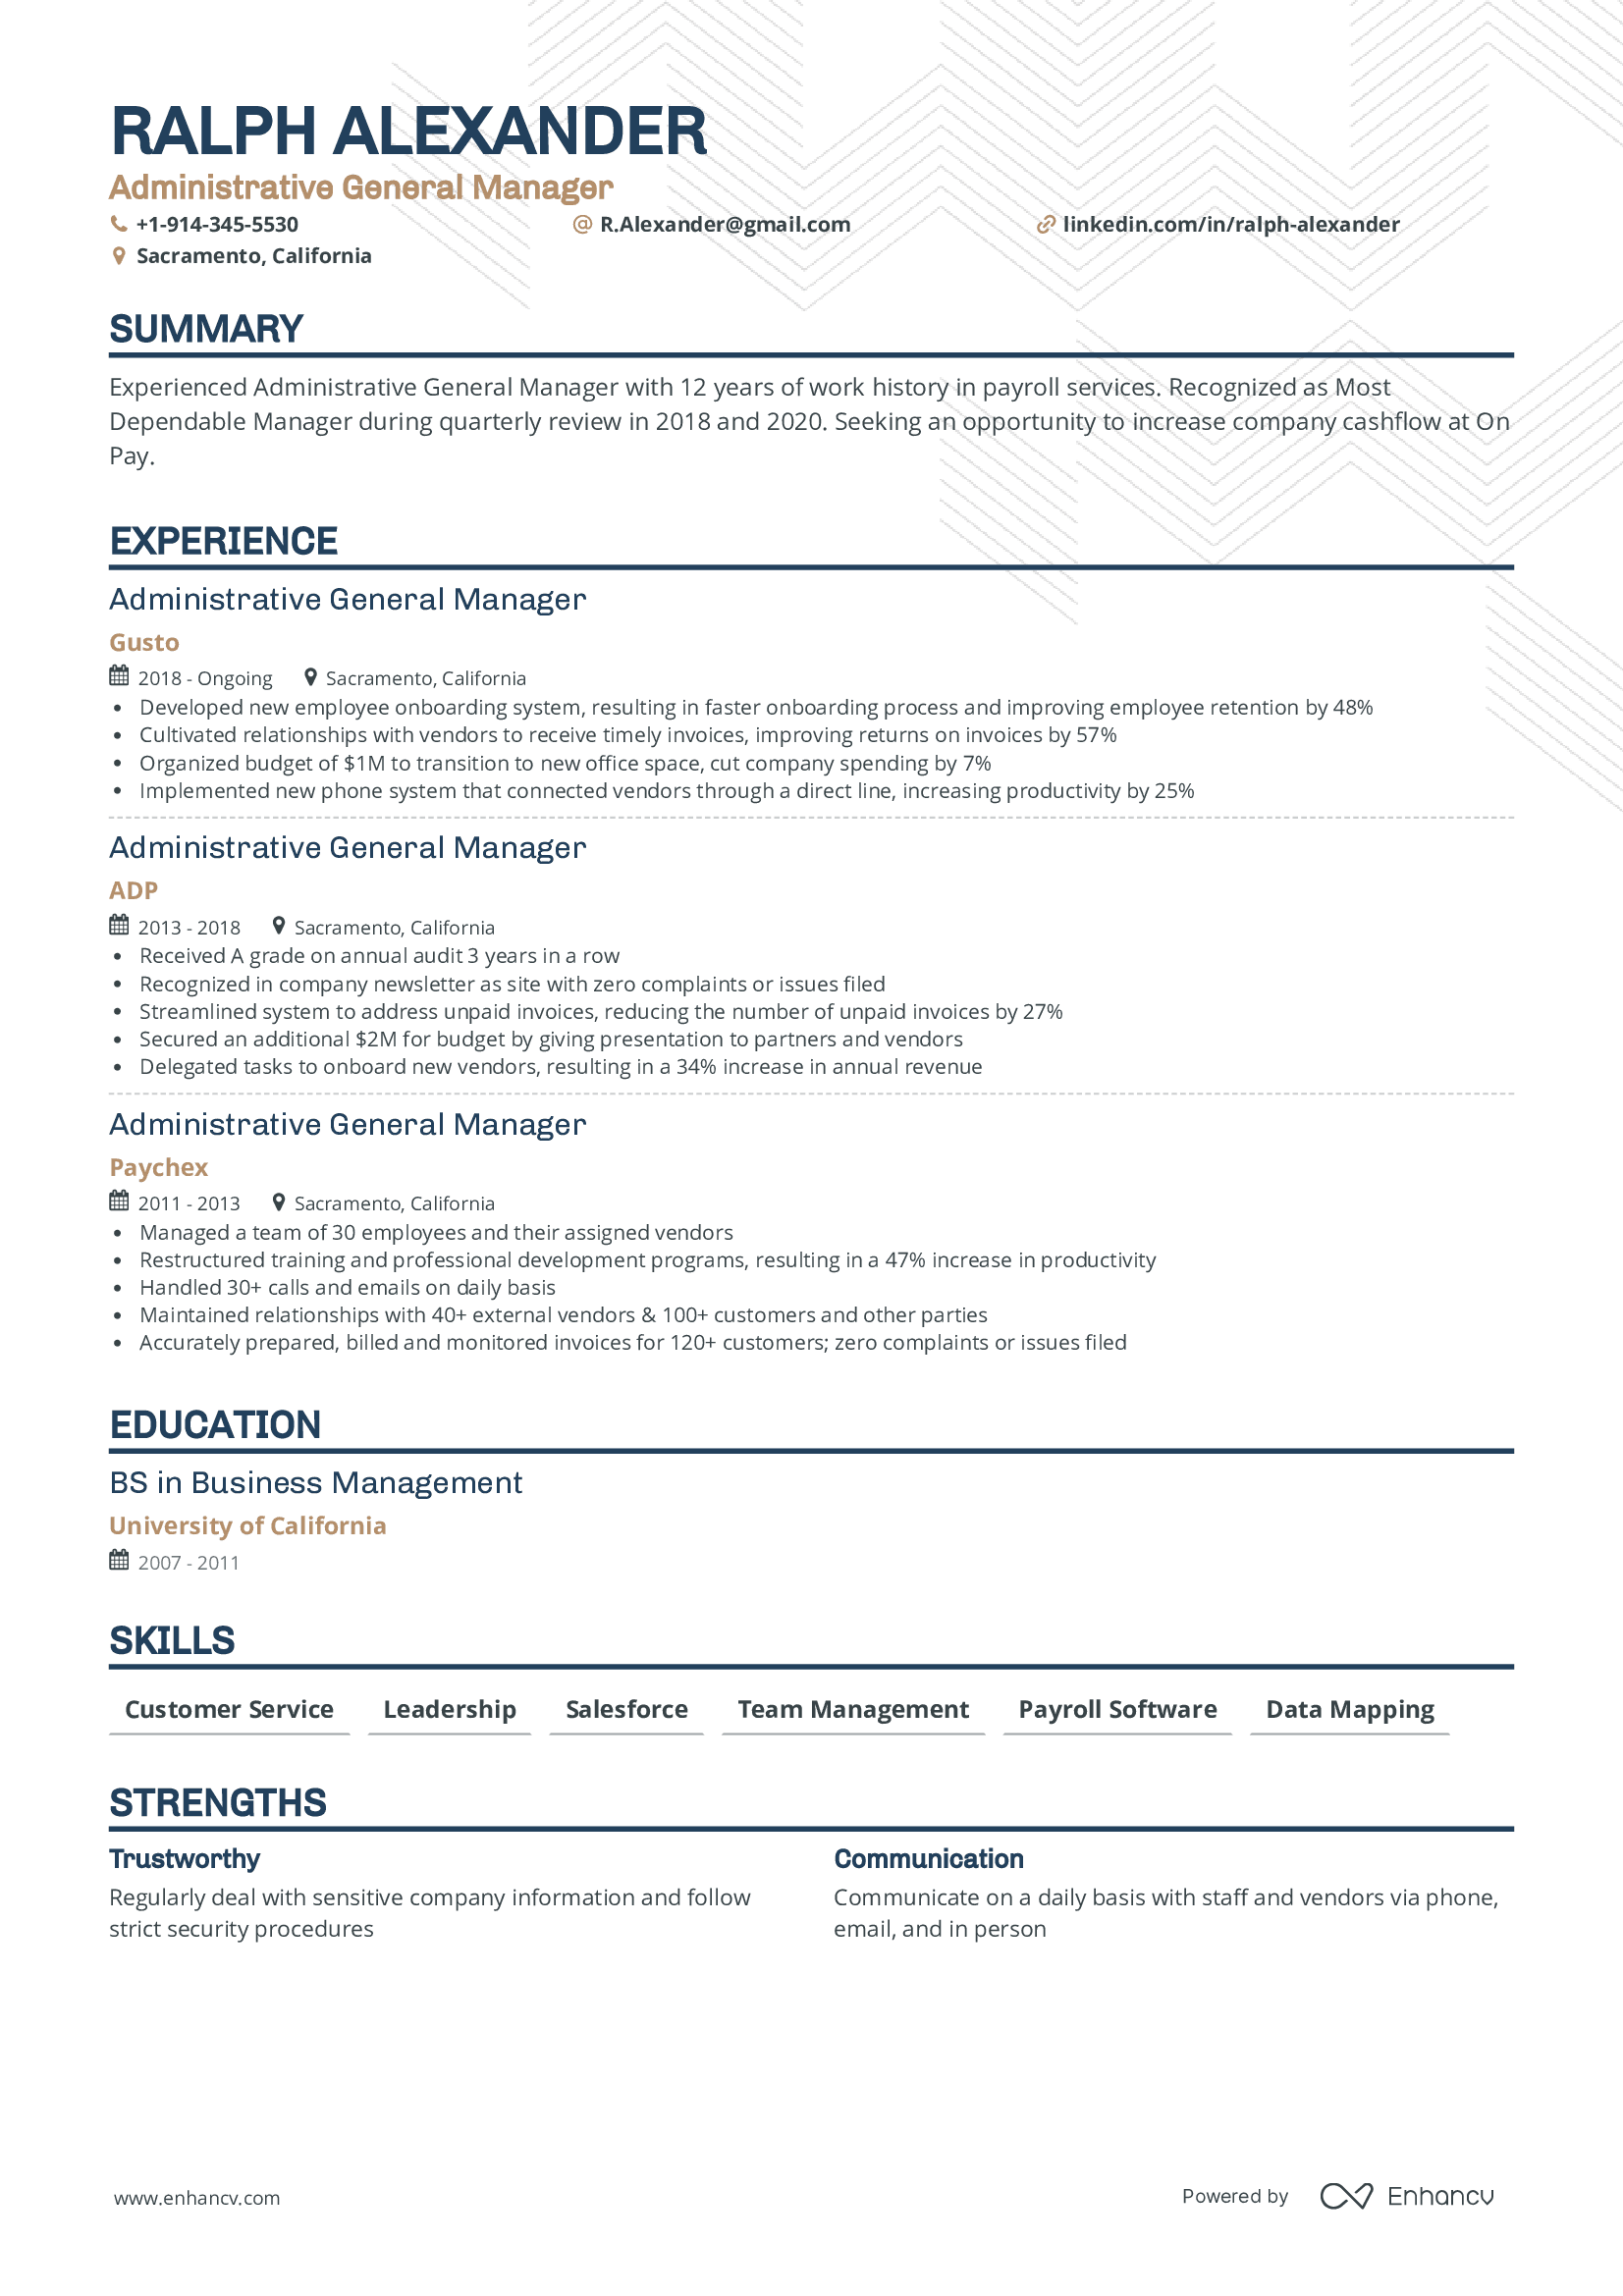 Administrative GM resume.png